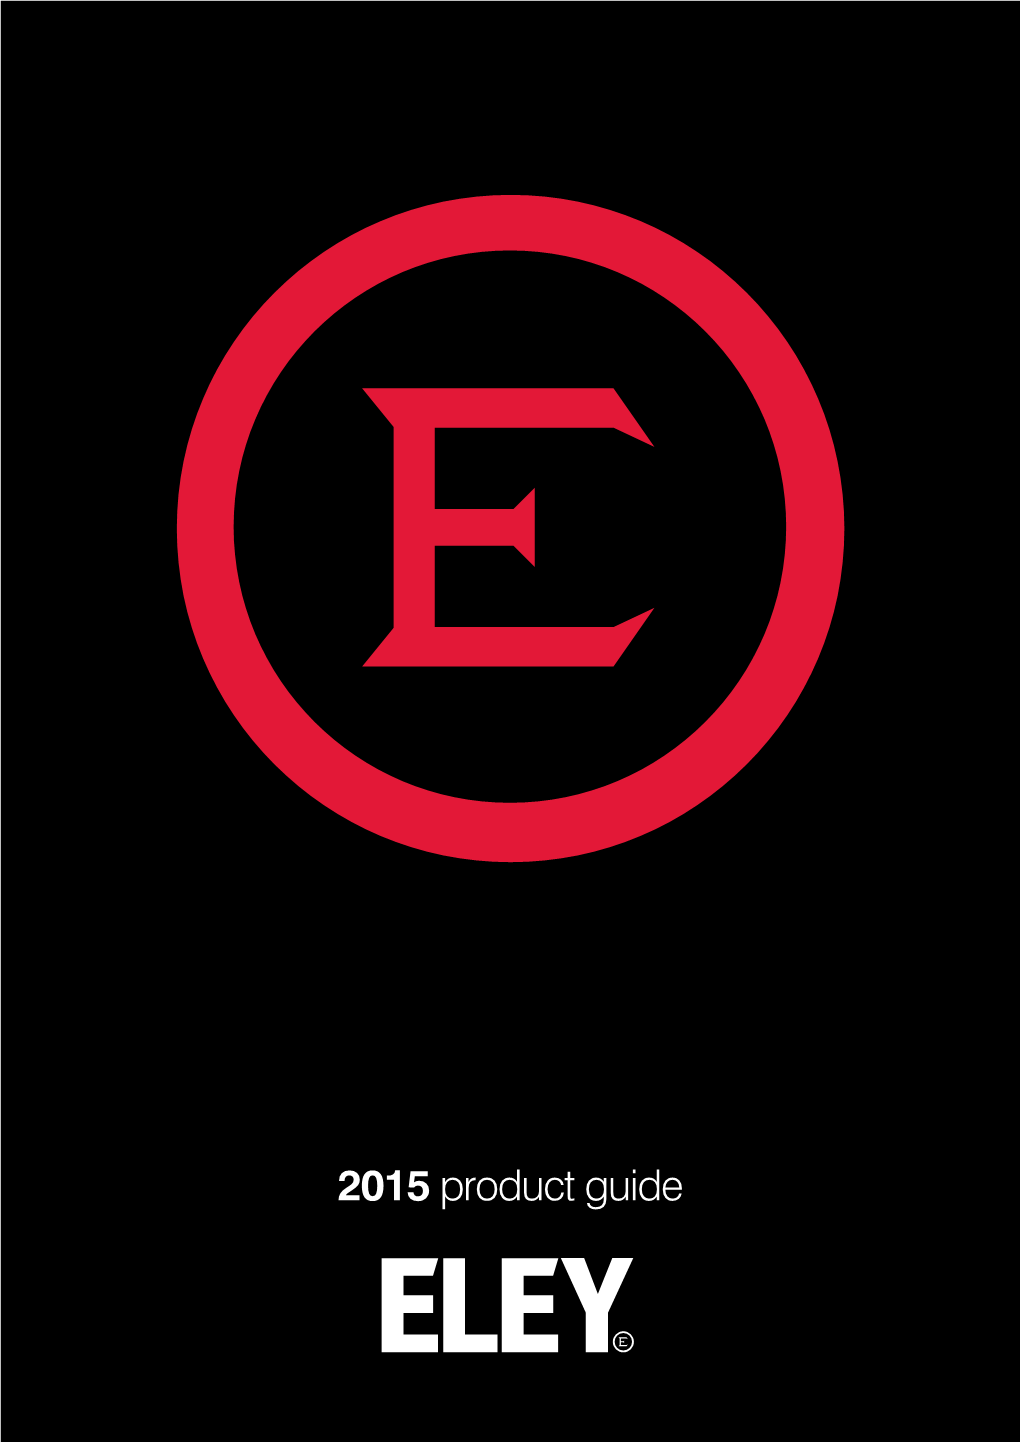 2015 Product Guide There’S Only One Brand That Can Claim Their Product Was Used to Win